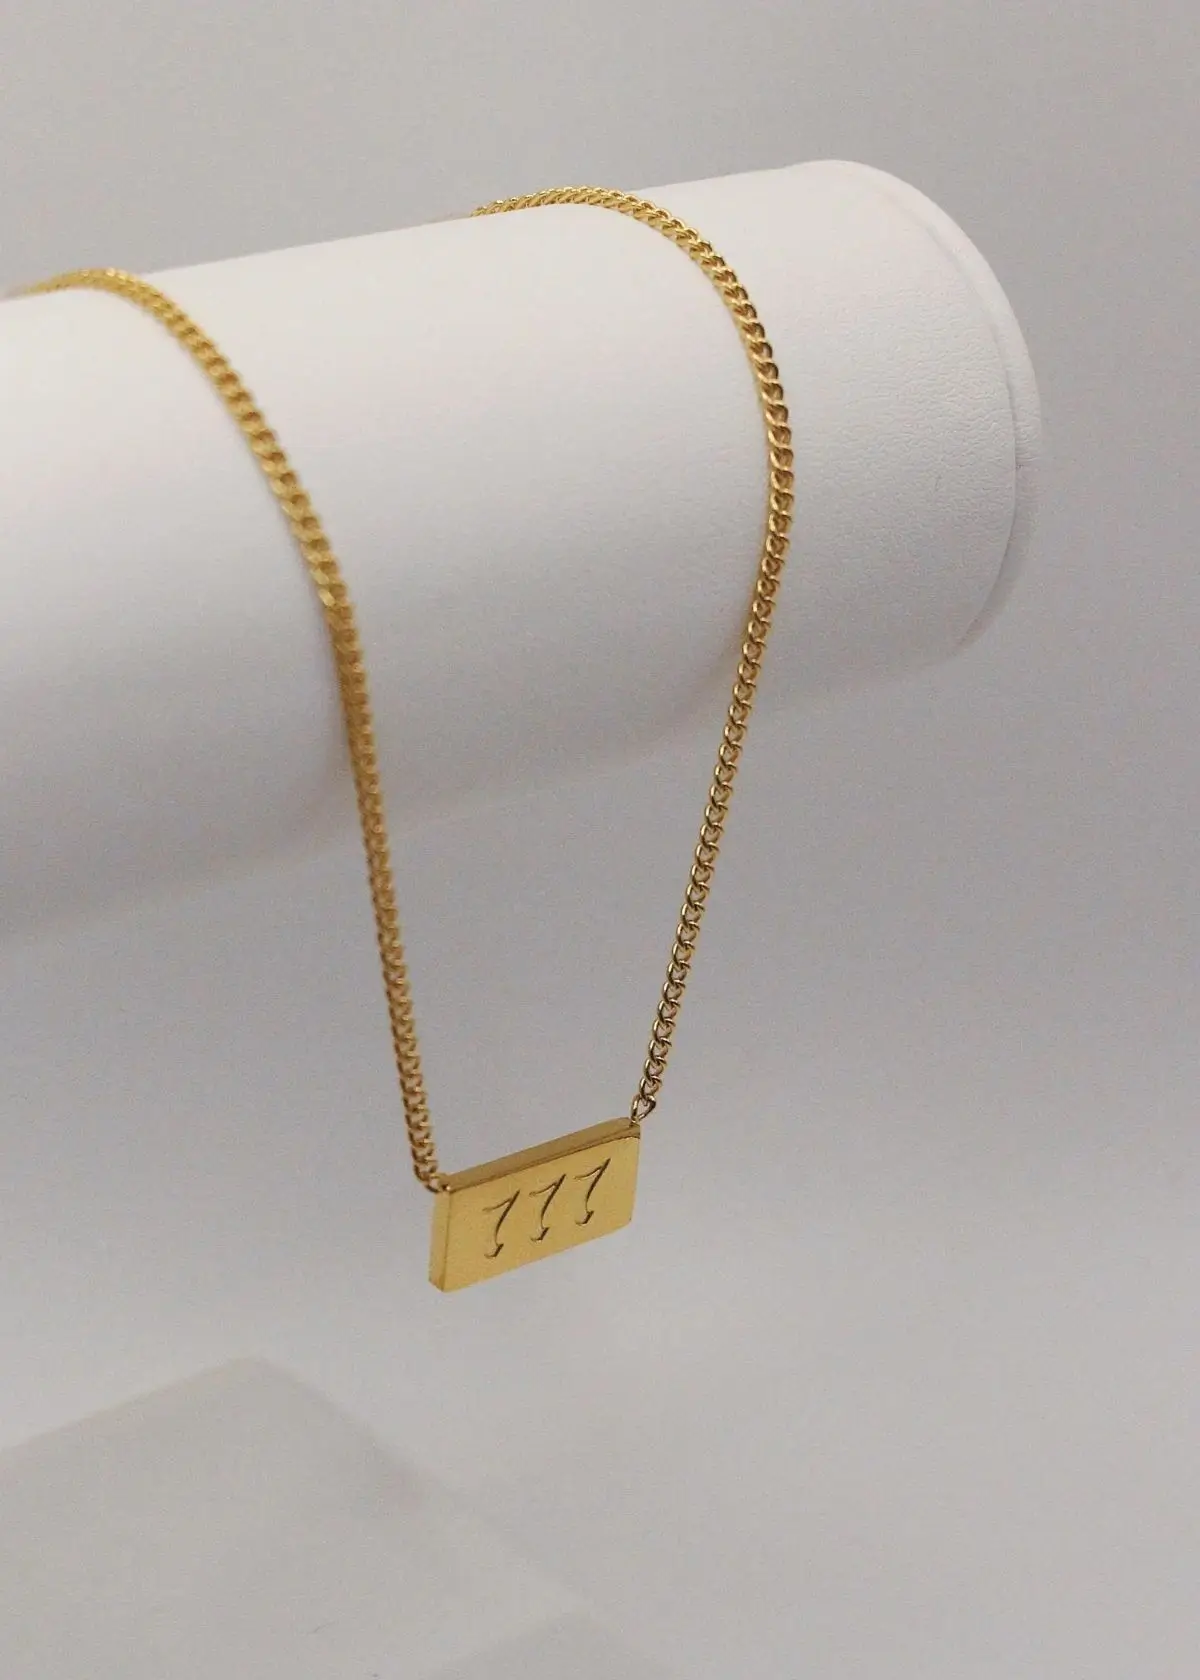 777 necklace